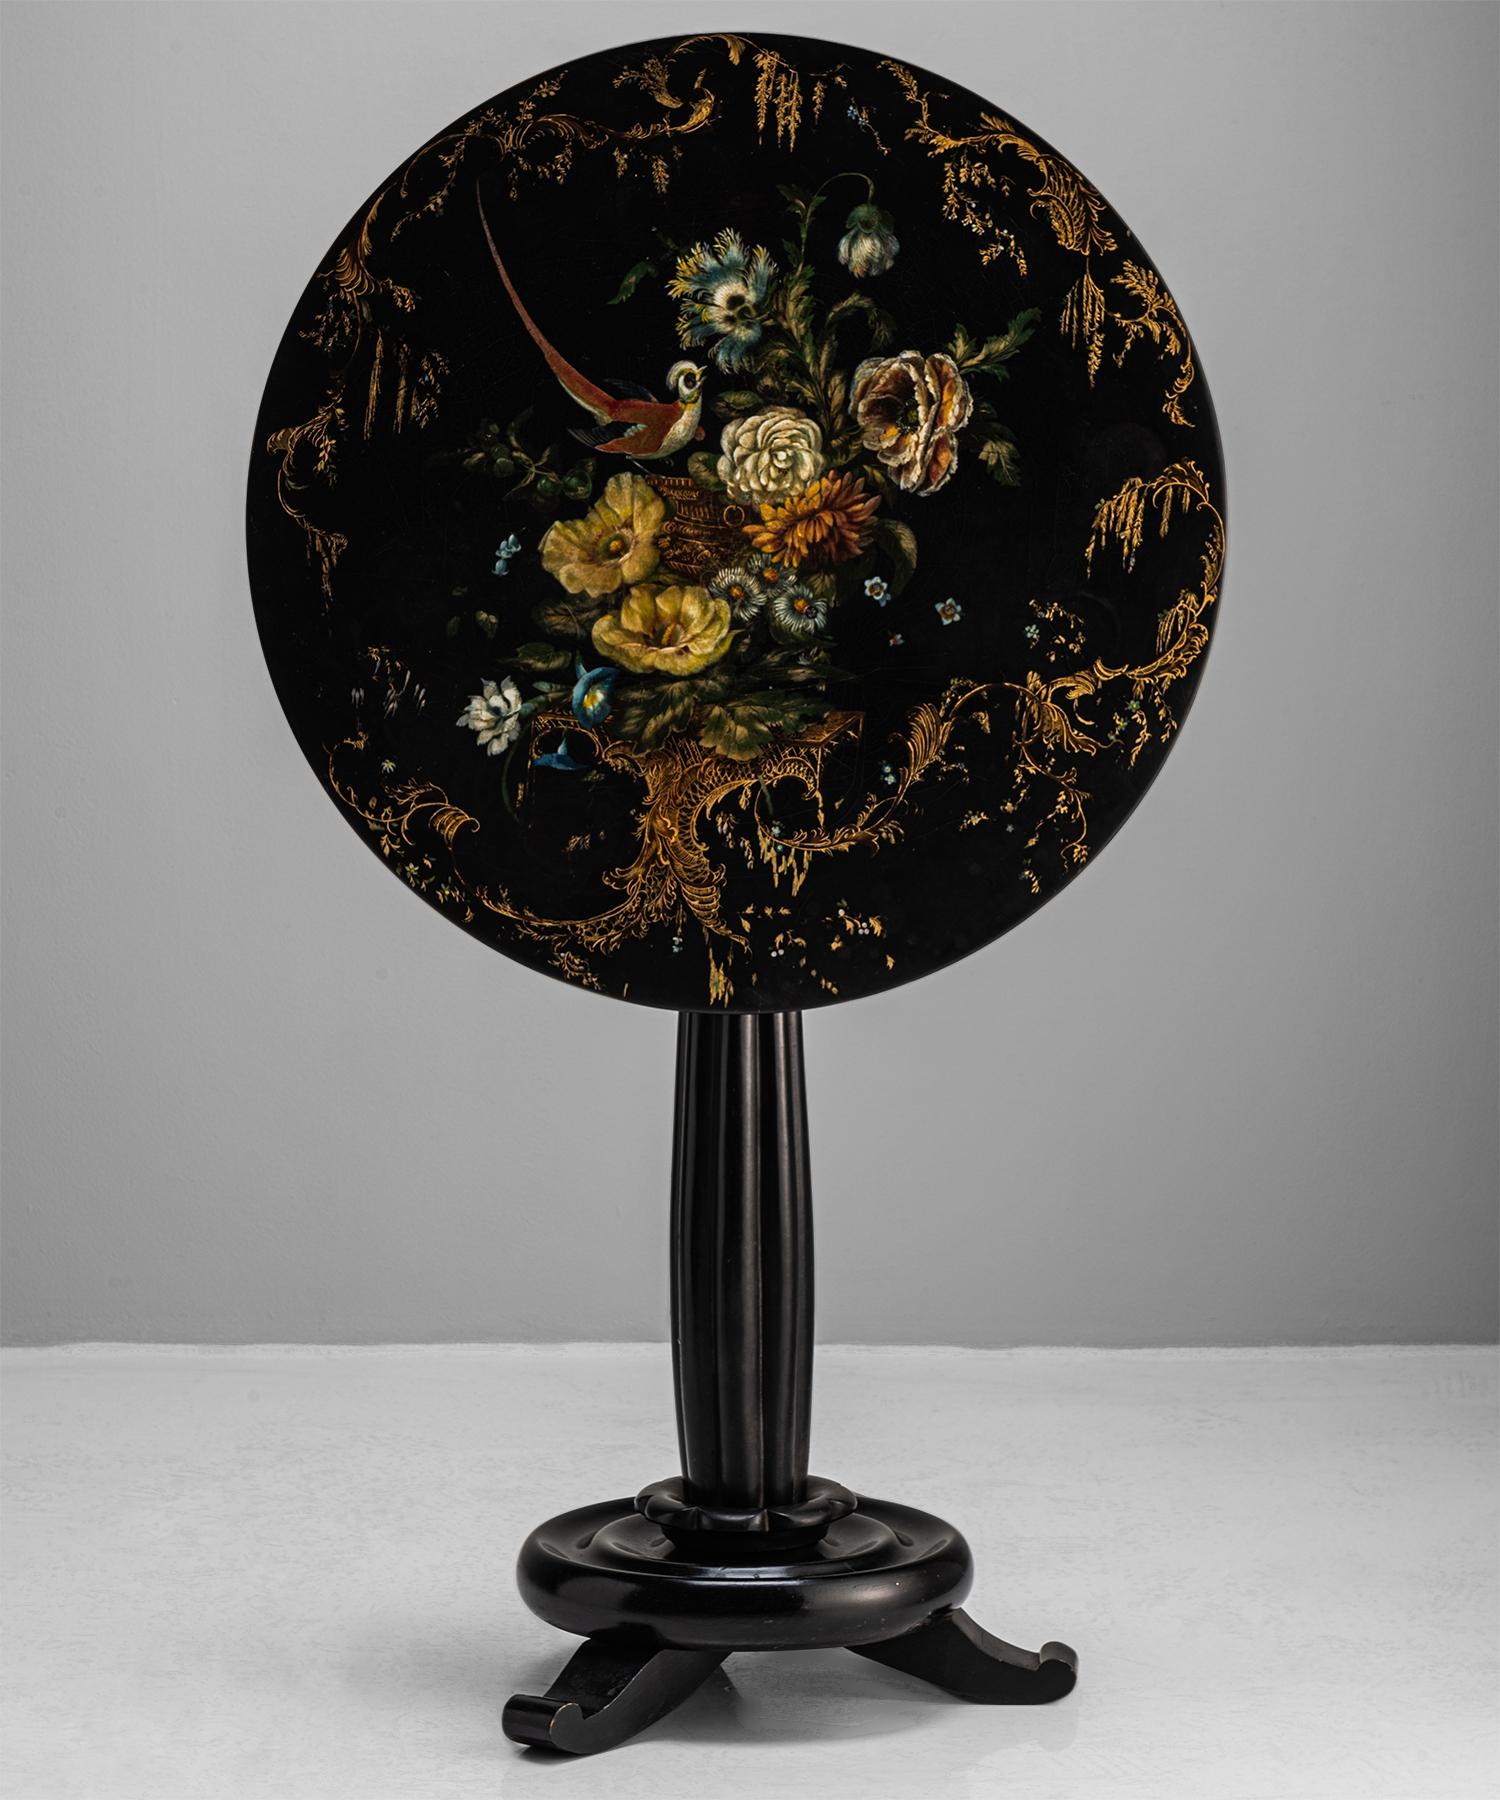 Jennens & Bettridge tilt-top occasional table
England circa 1840
Jennens and Bettridge were a royally appointed maker and highly regarded for producing quality papier-mâché wares. This table features an ebony lacquered papier-mâché top.
Meaures: